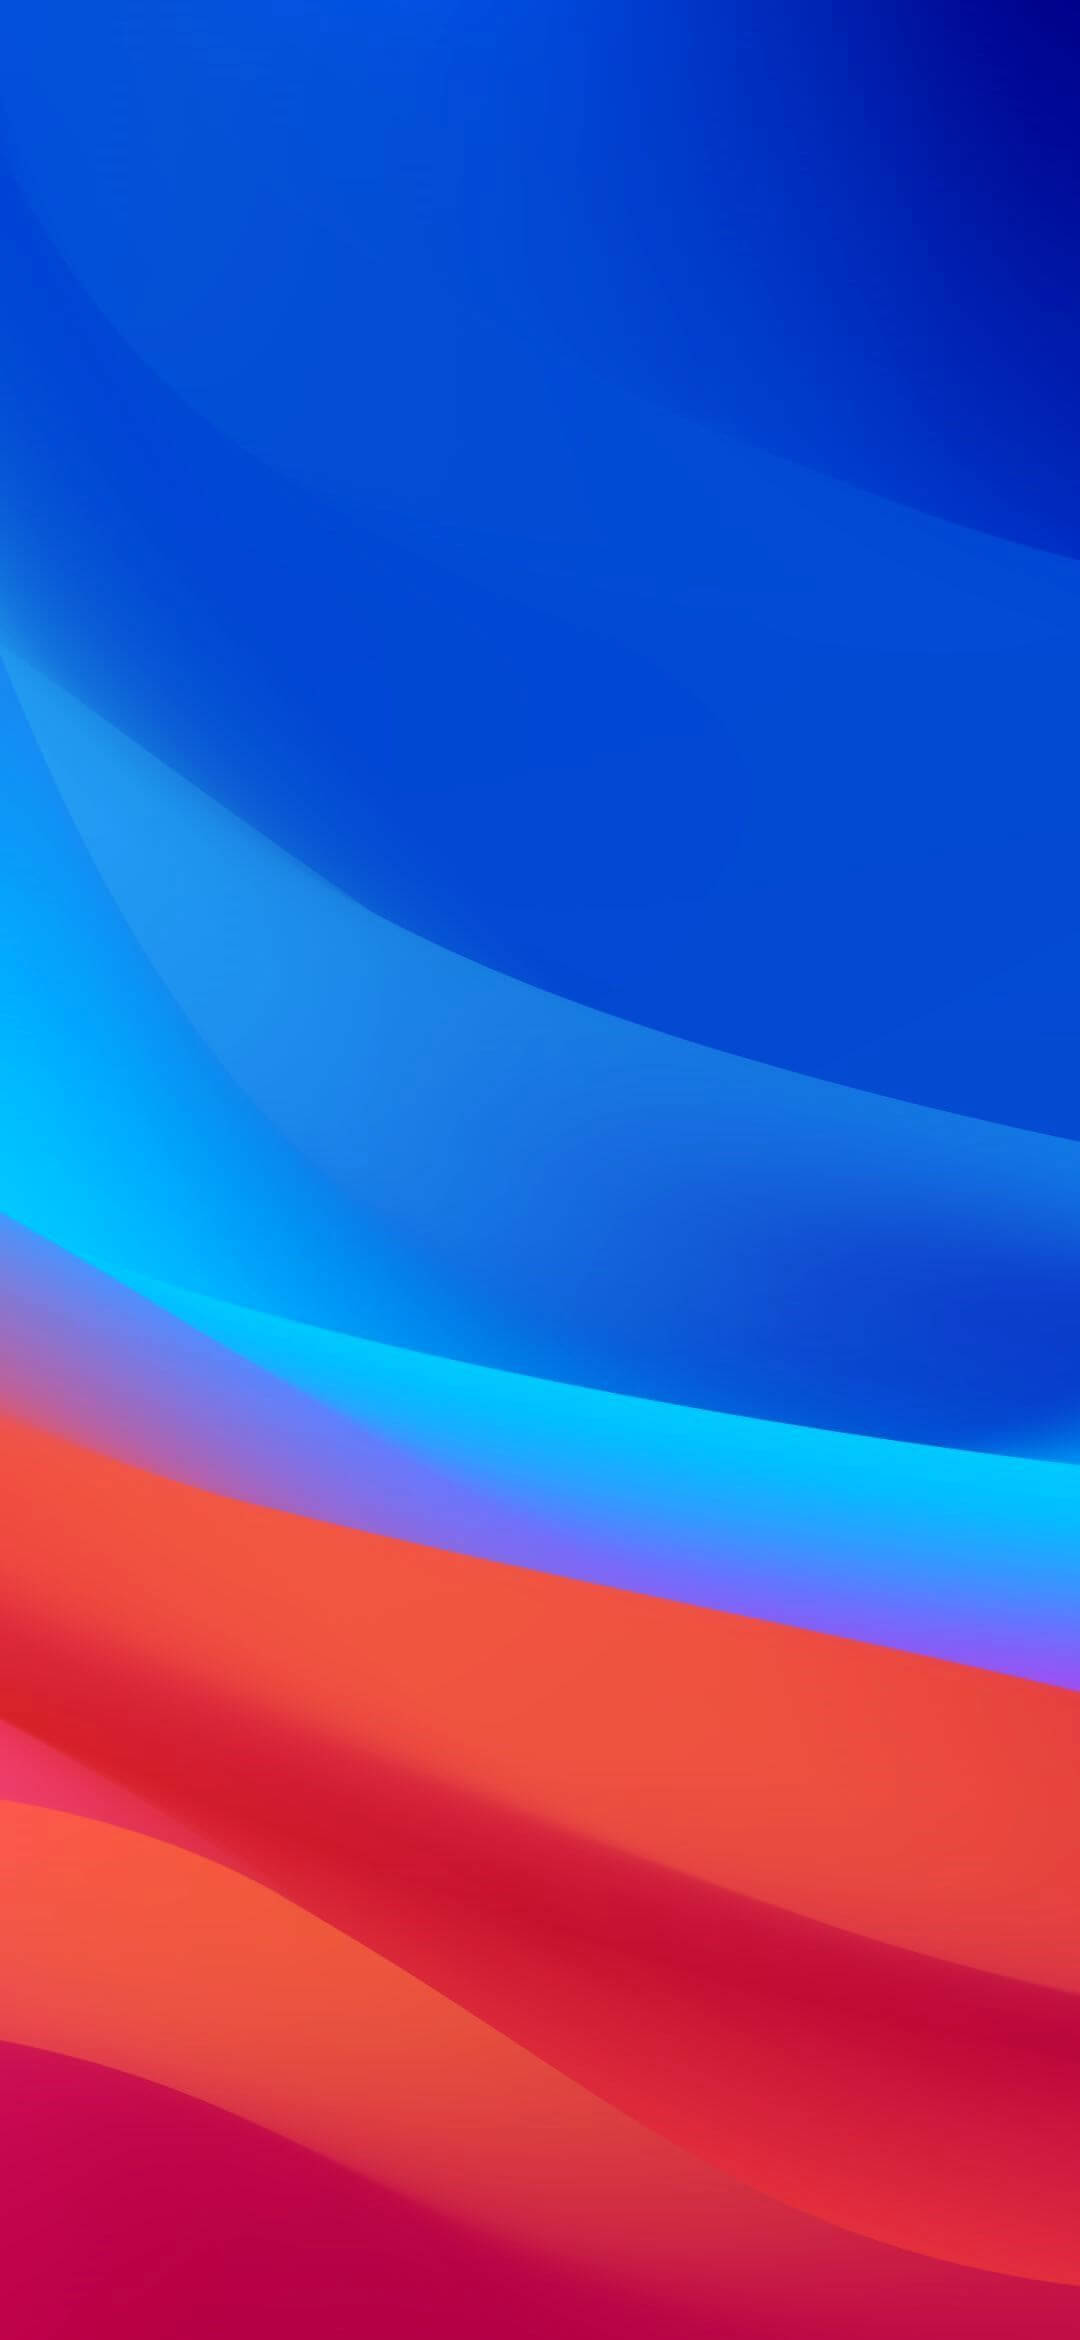 Tải xuống APK 4k wallpapers of oppo f9 pro  HD Backgrounds cho Android